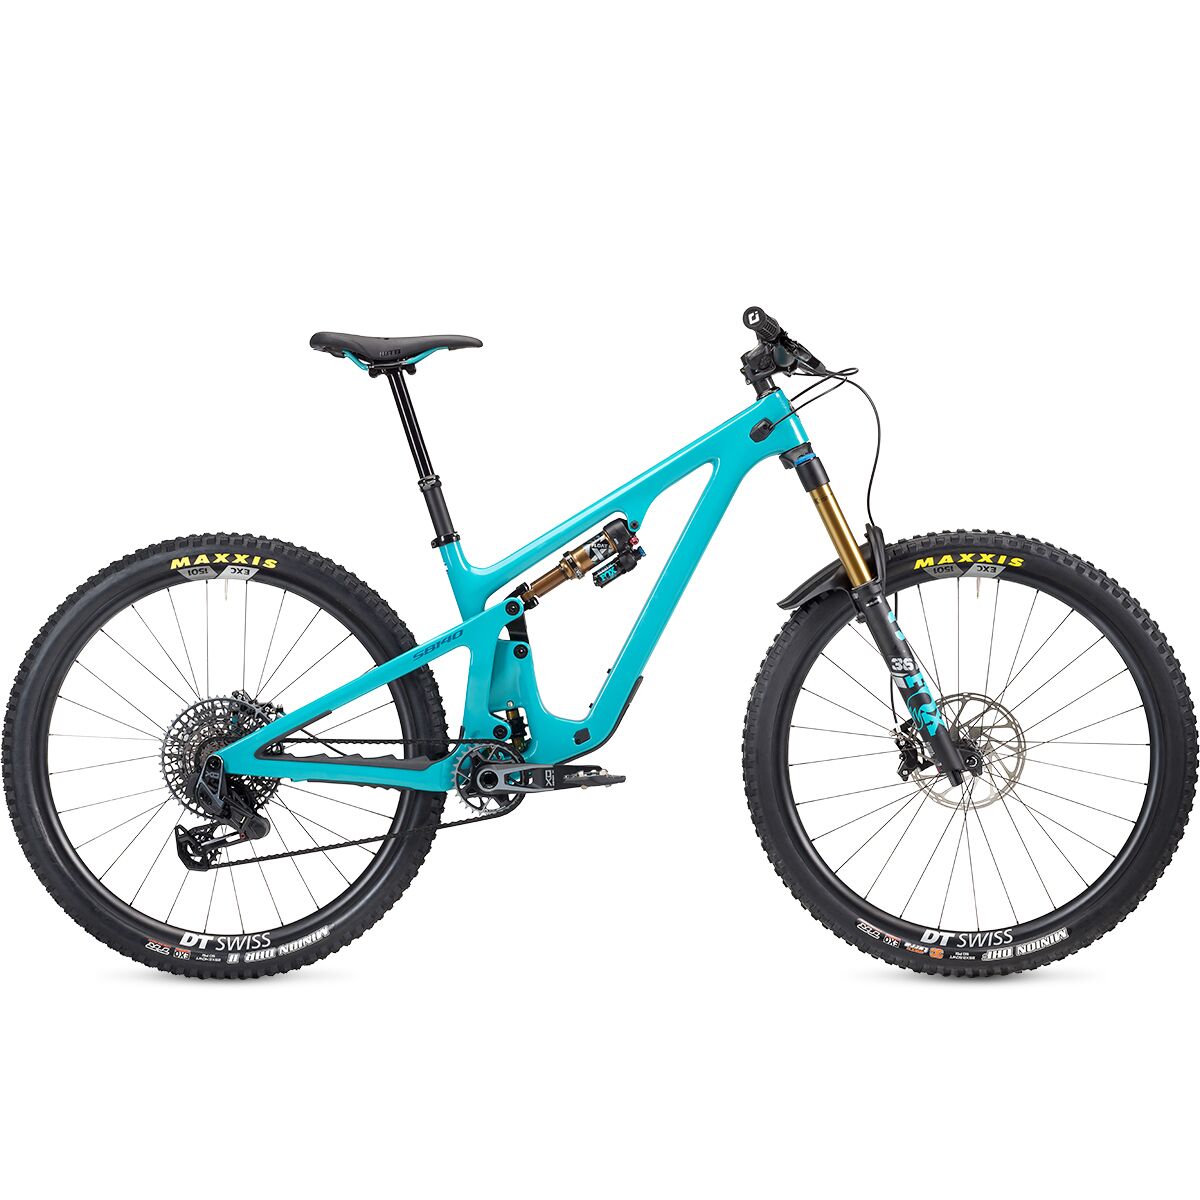 Yeti Cycles SB140 T3 TLR X0 Eagle T-Type 29in Carbon Wheel Mountain Bike